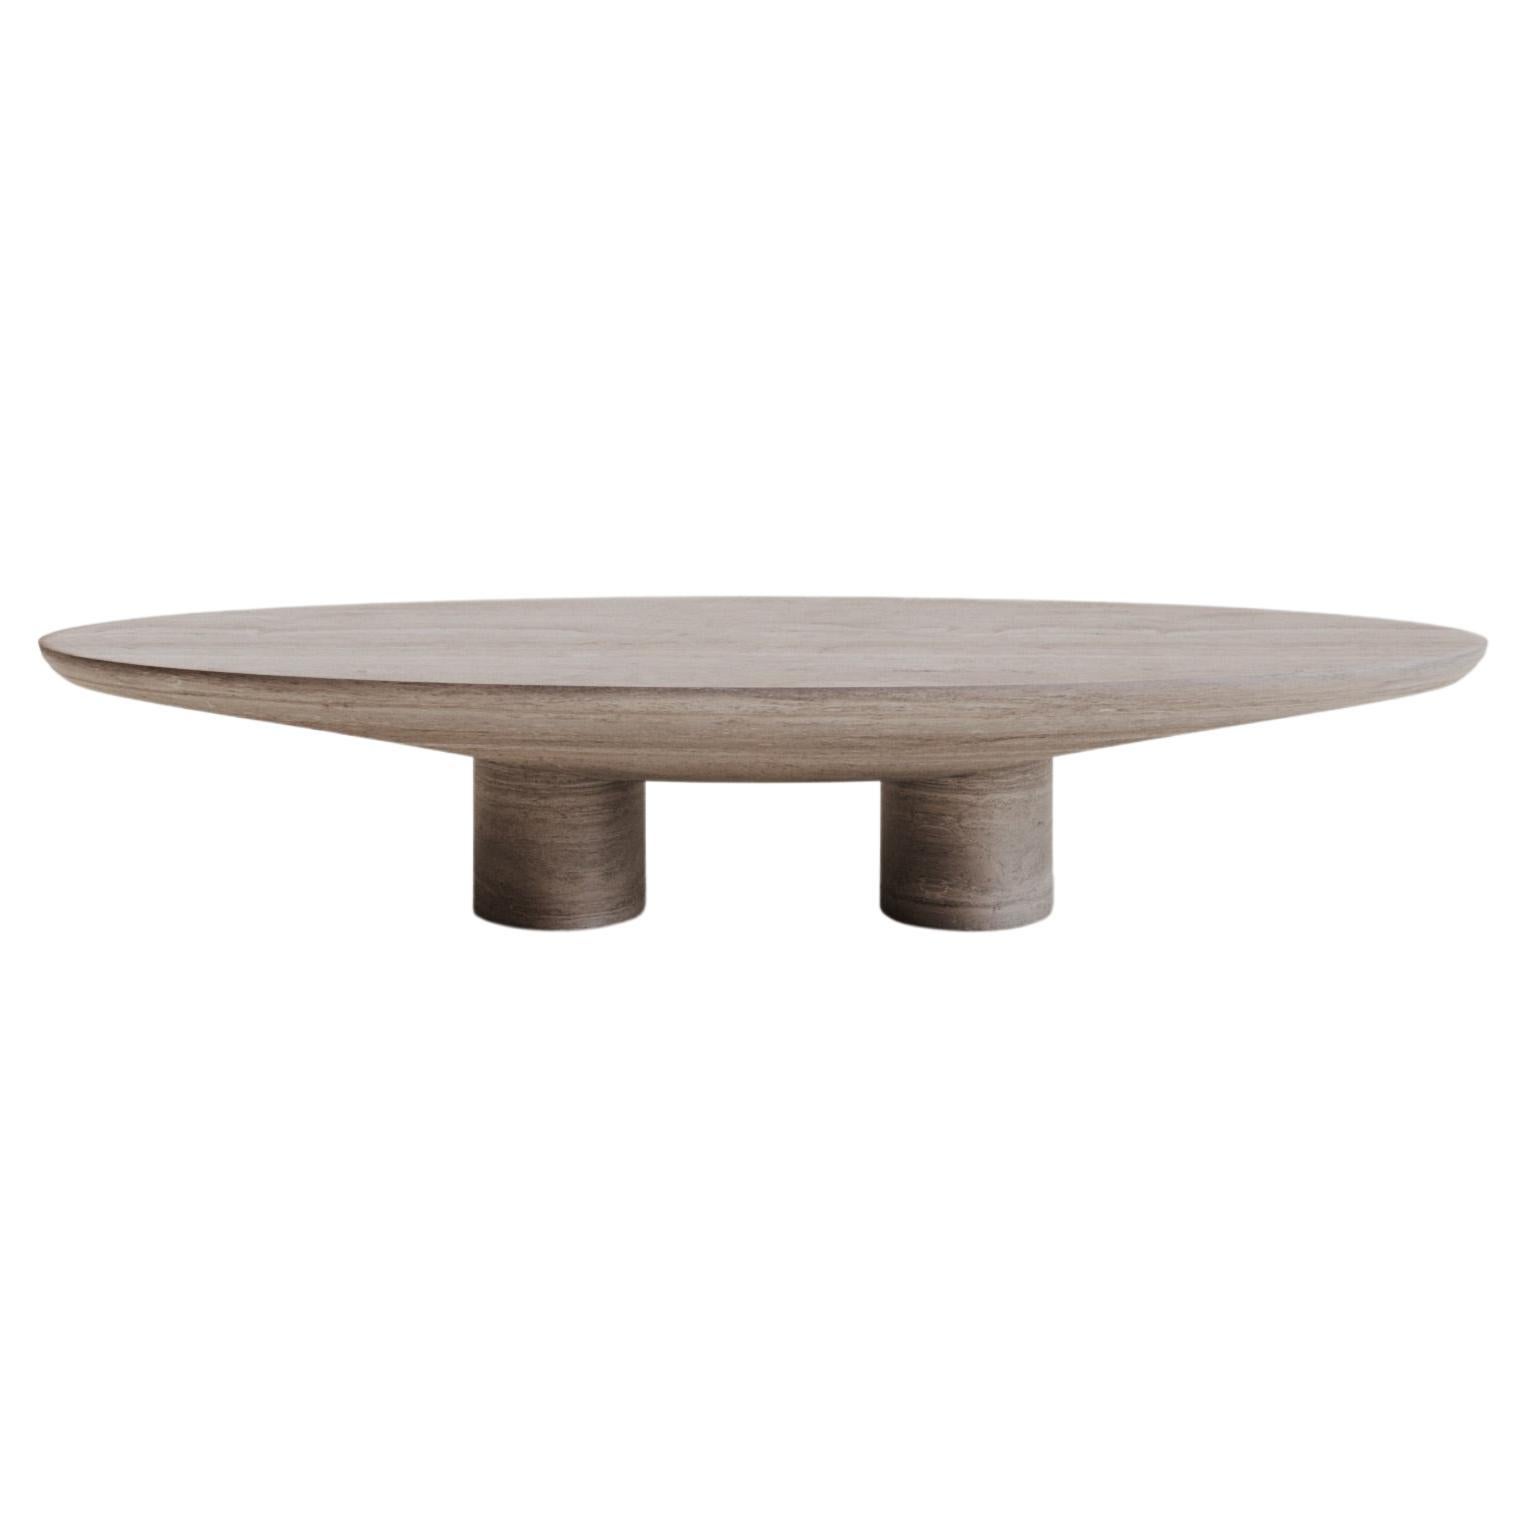 Solid Silver Travertine Oval Coffee Table 160 by Studio Narra For Sale